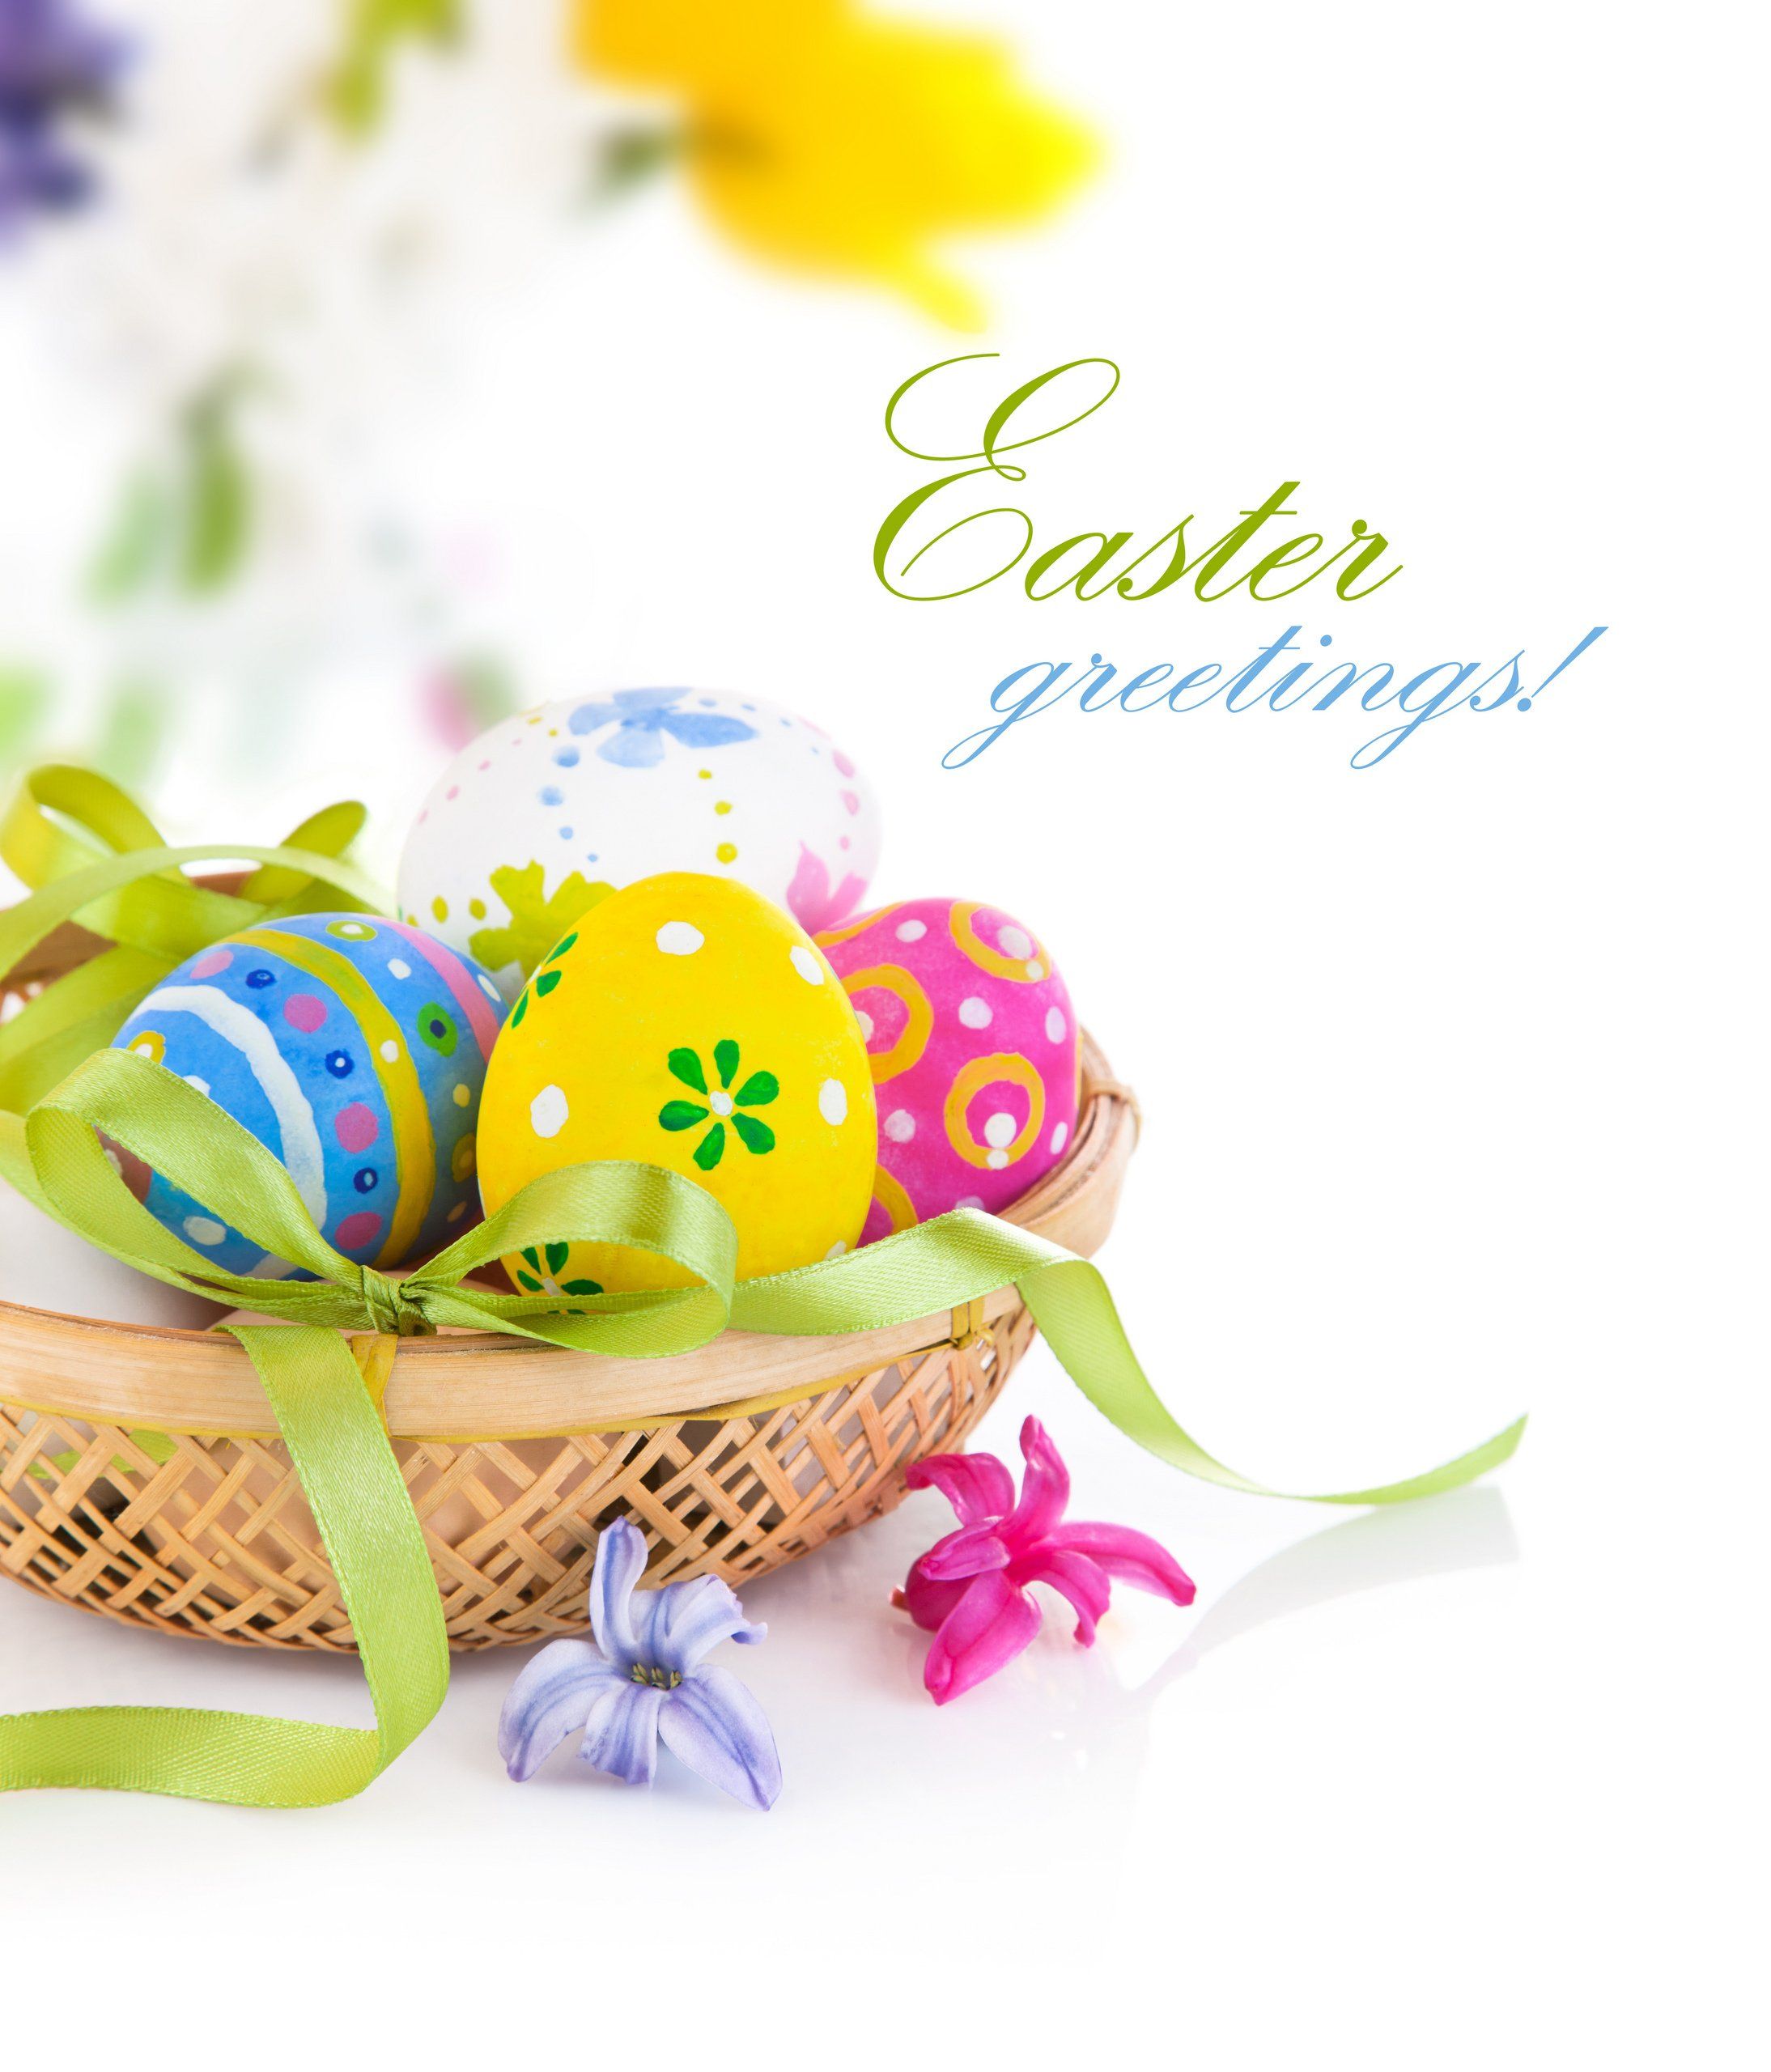 Eastern easter messages image quotes 23 easter card wallpaper on wallpaperafari